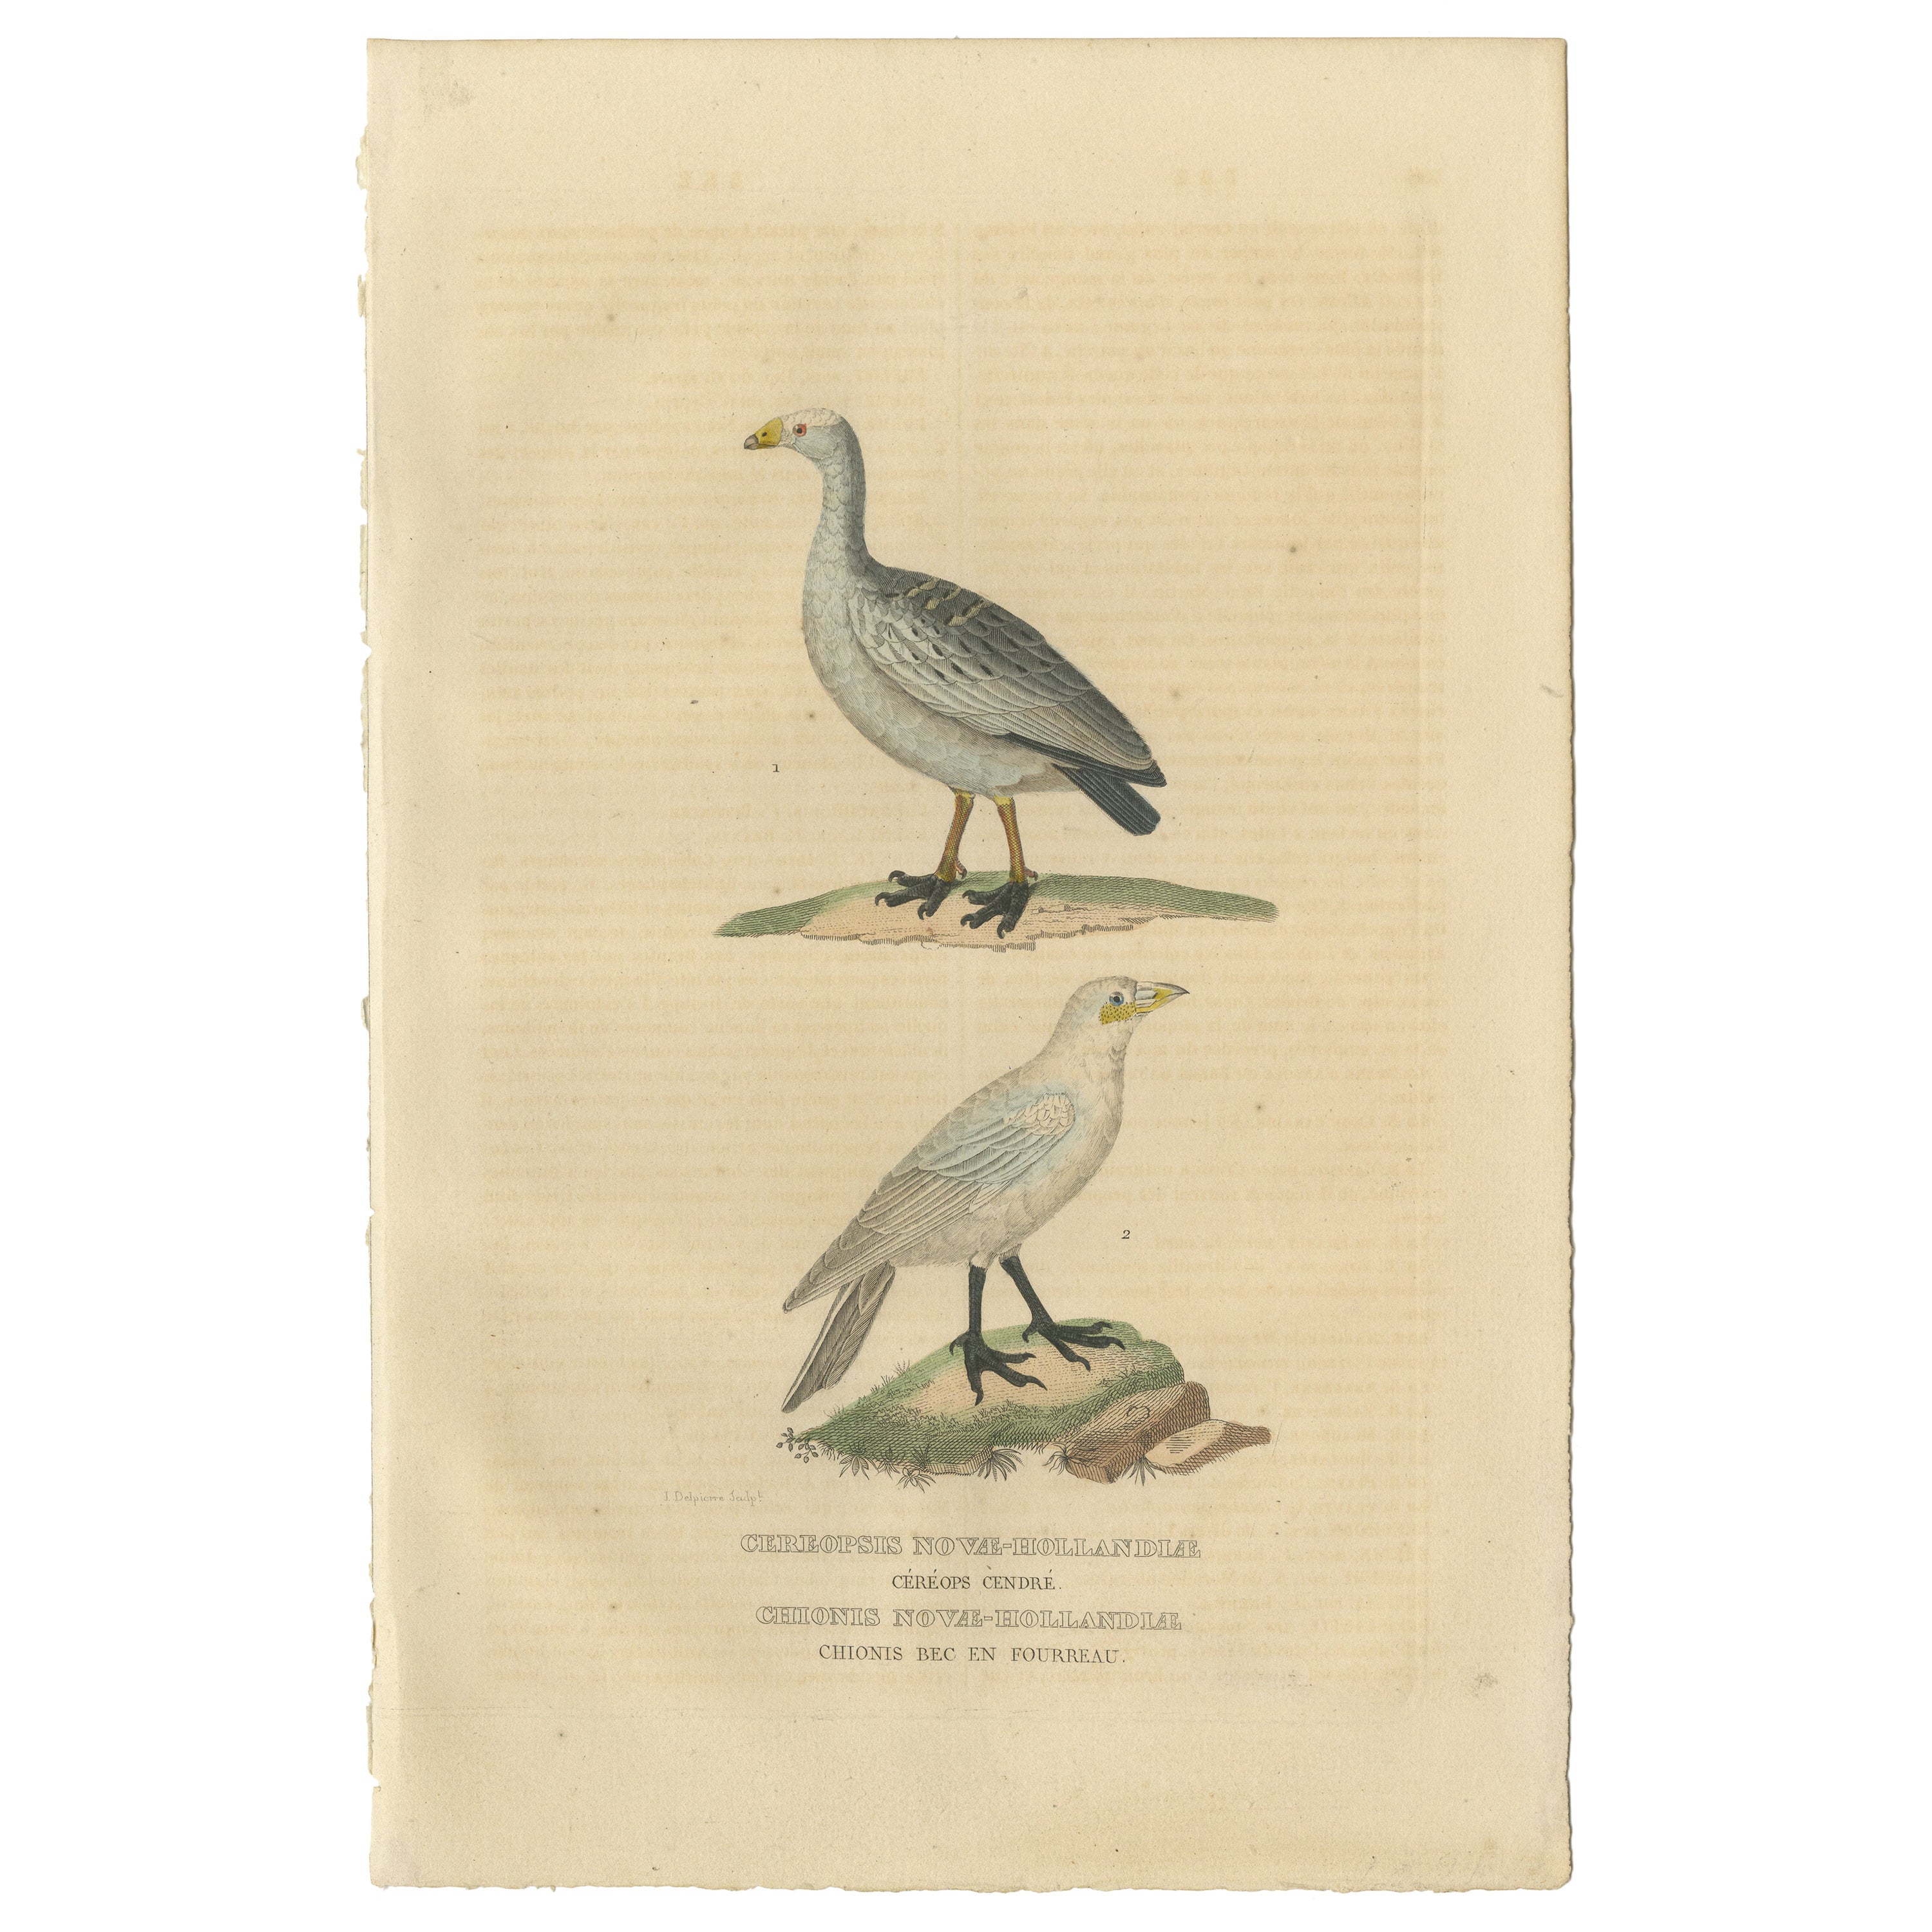 Old Hand-Colored Bird Print of the Cape Barren Goose and the Snowy Sheathbill